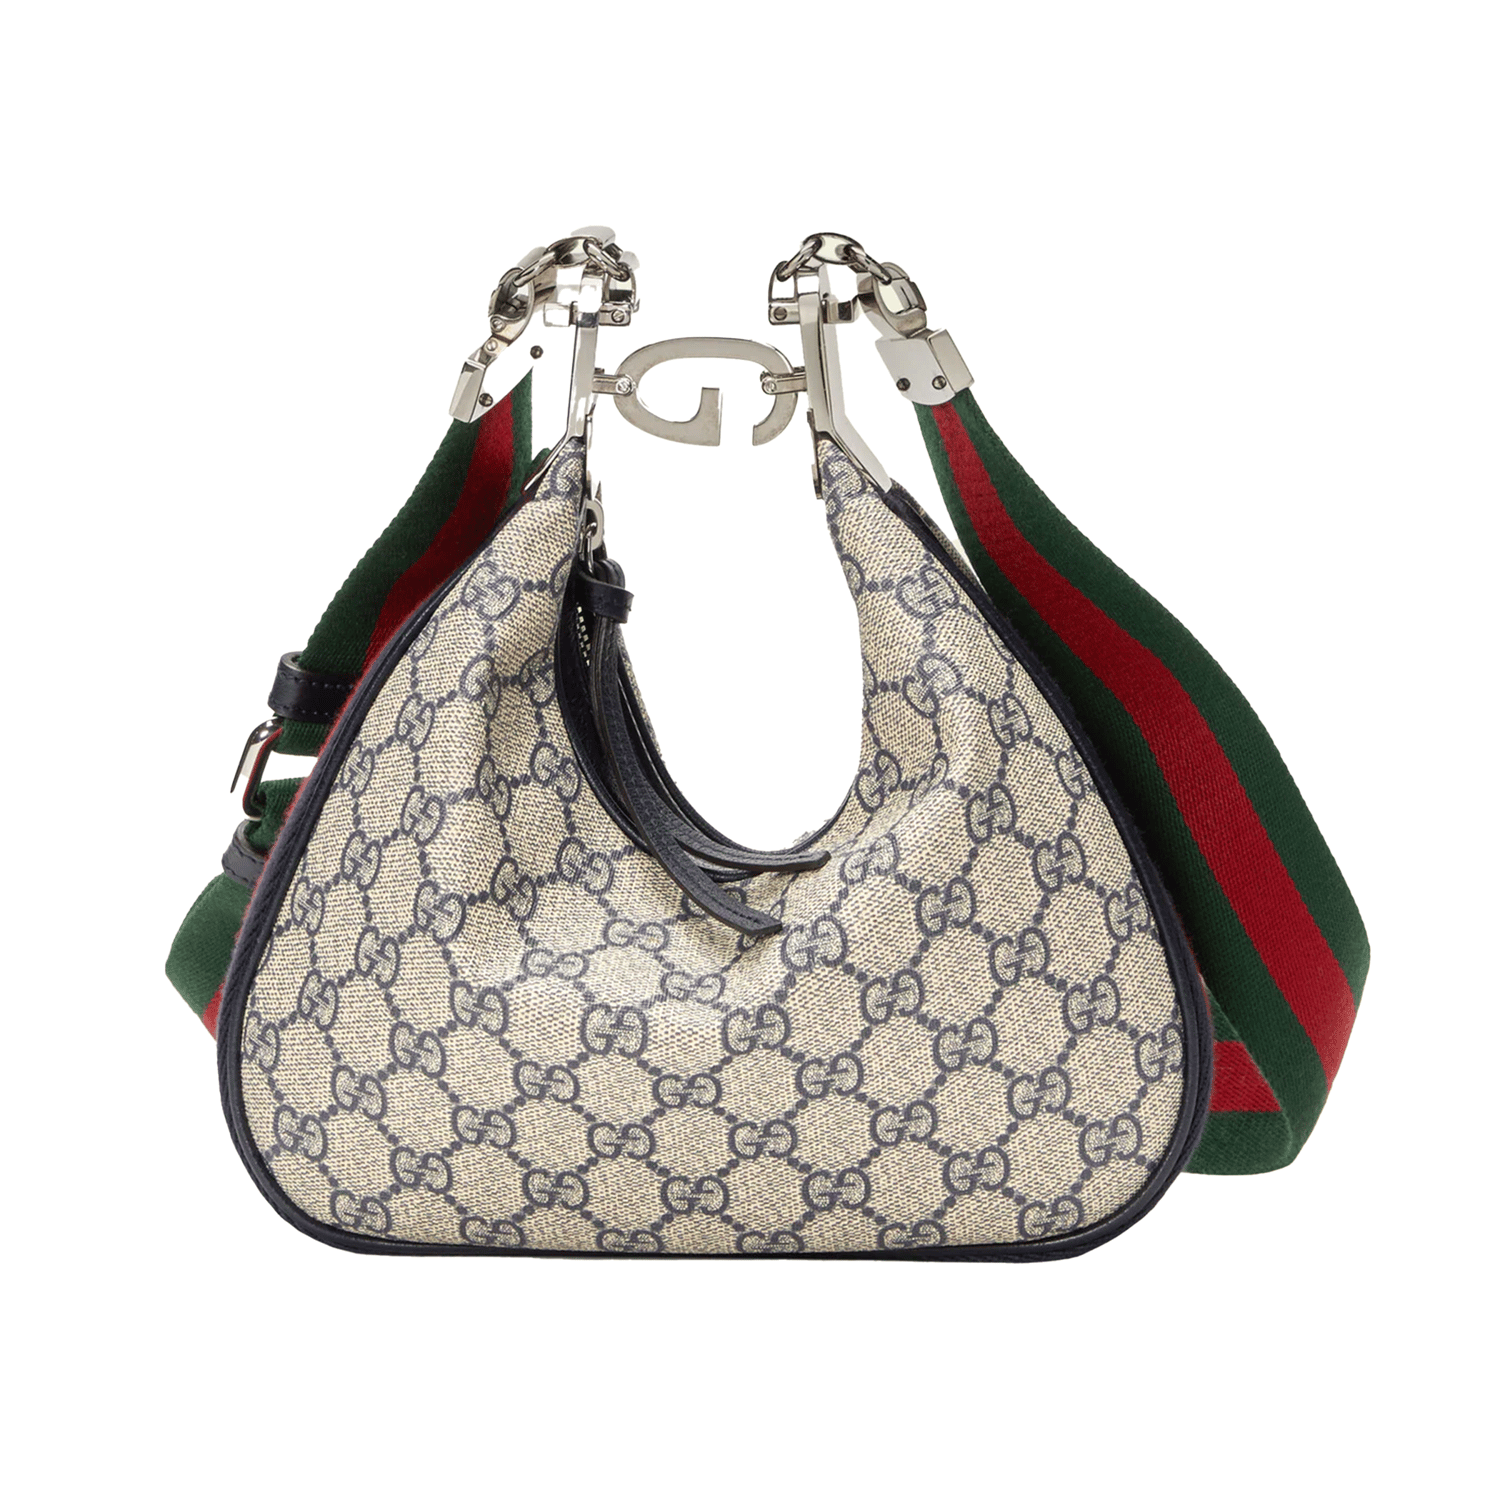 WHAT FITS IN MY GUCCI ATTACHE LARGE HANDBAG